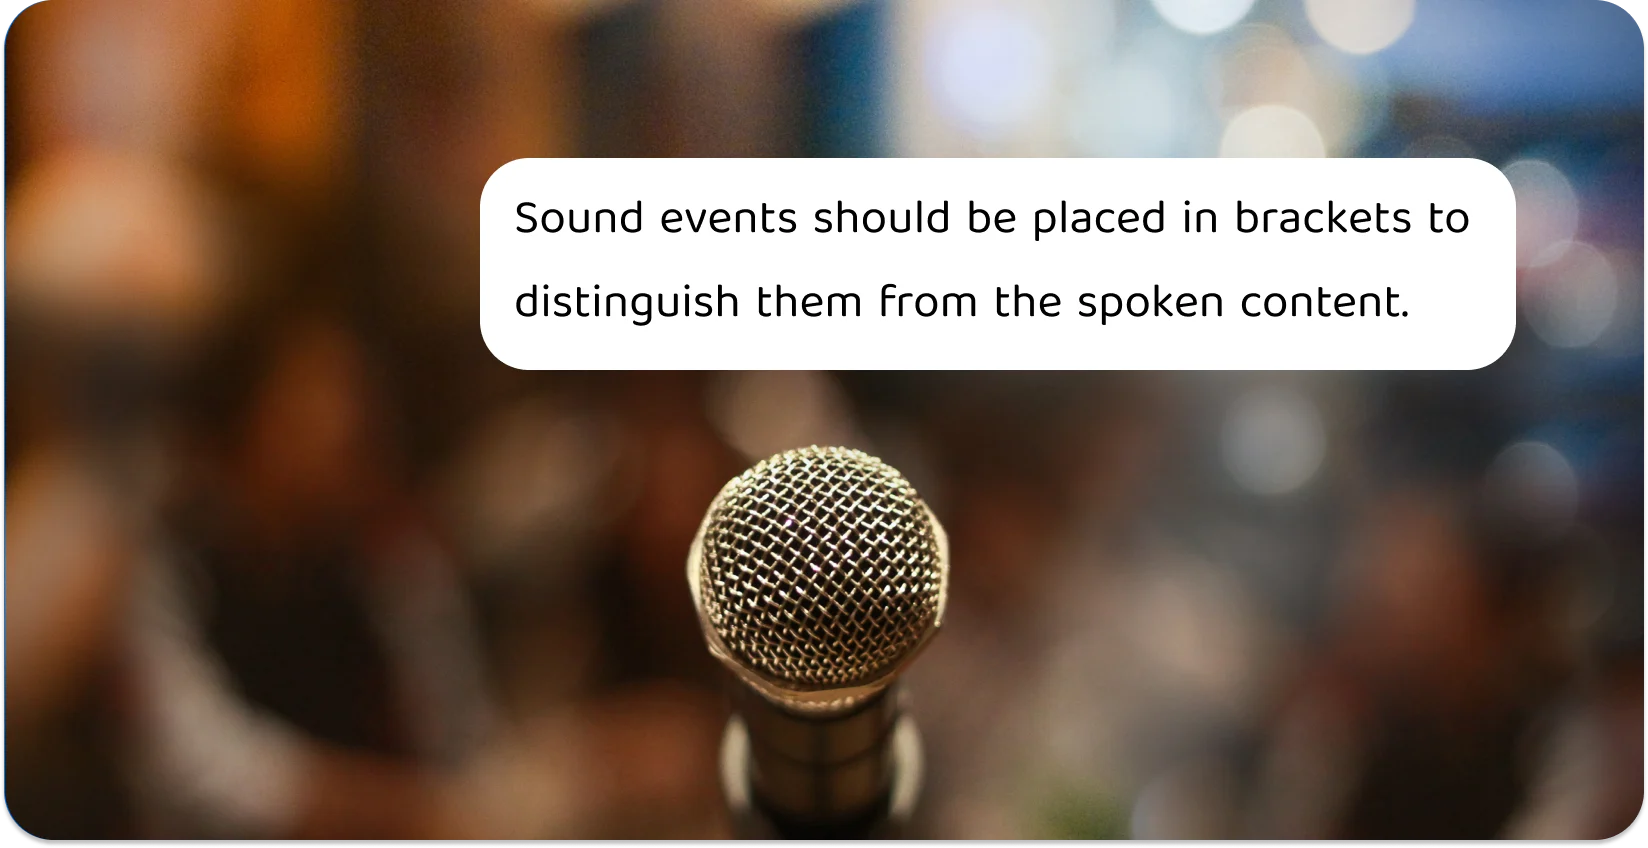 A microphone with a blurred background, conveying the importance of sound event notation in transcription.